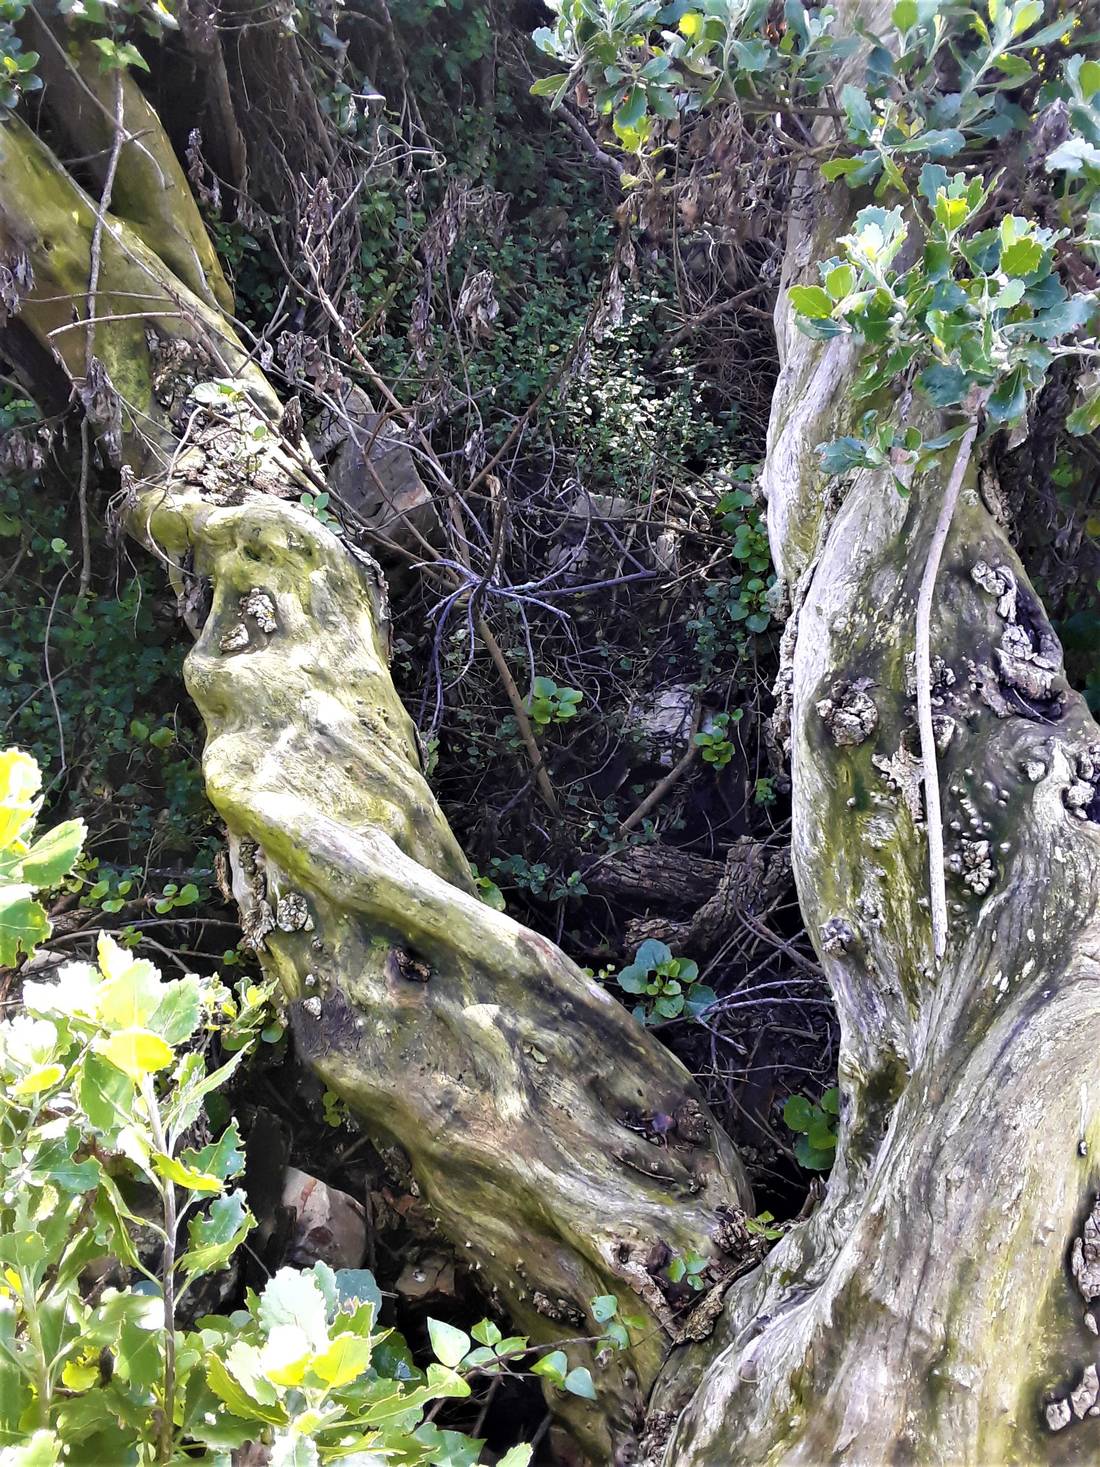 Exotic twist in the trunk of this indigenous fynbos tree, stunning impression